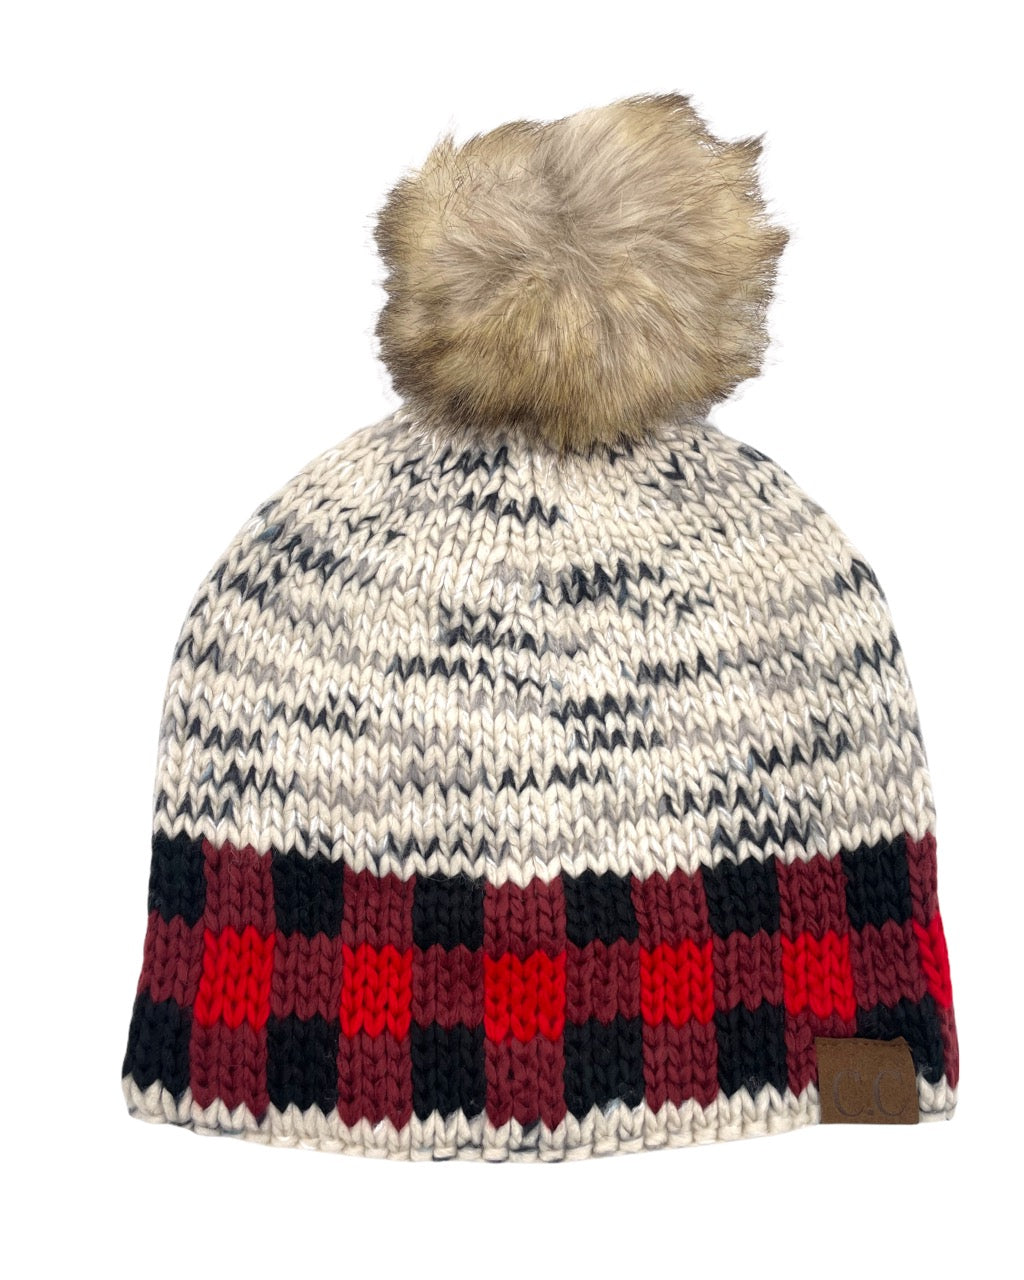 HAT-2083 Buffalo Check Mixed Print Faux Fur Beanie - Ivory/Red